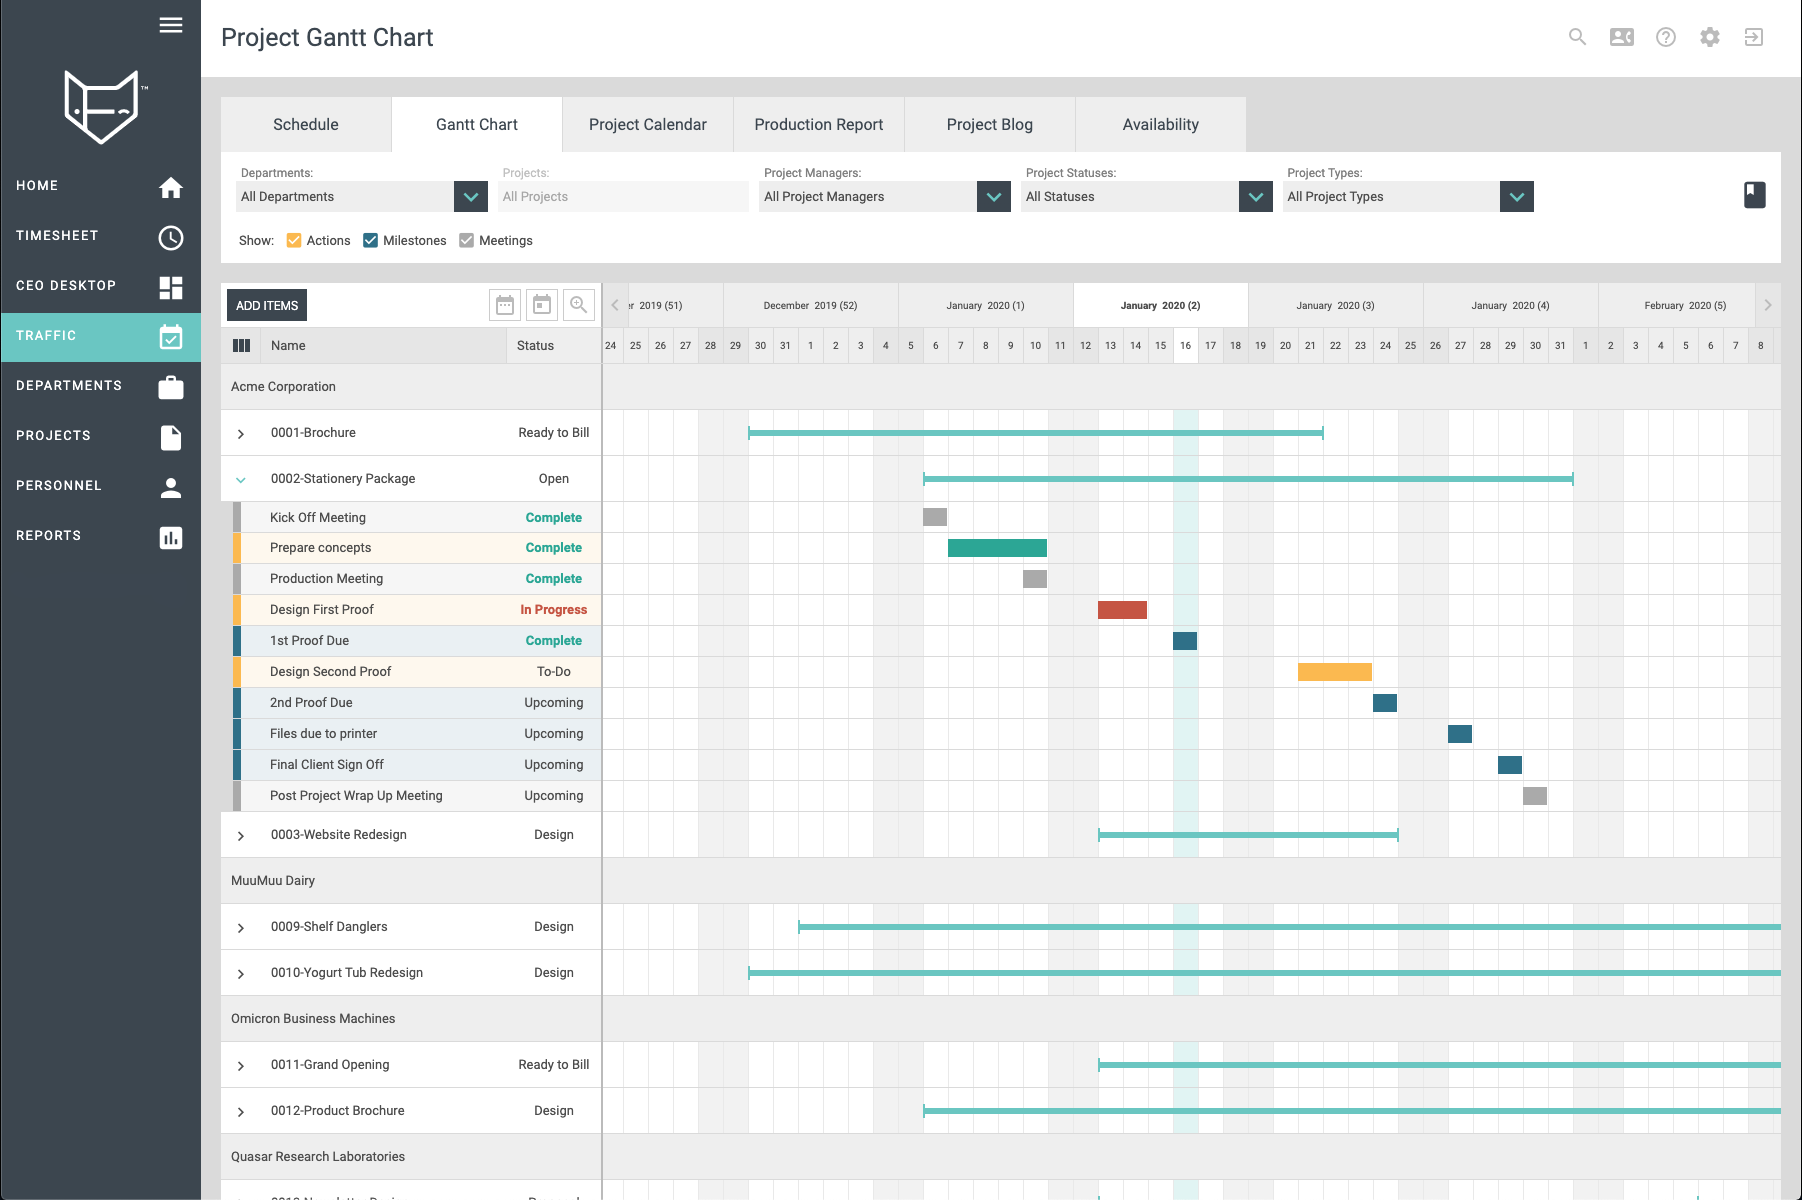 FunctionFox Gantt Charts provide an interactive, graphical view of your project schedule, including: actions, milestones, and project meetings. Make on the fly adjustments to your project schedule with easy to use drag and drop functionality.